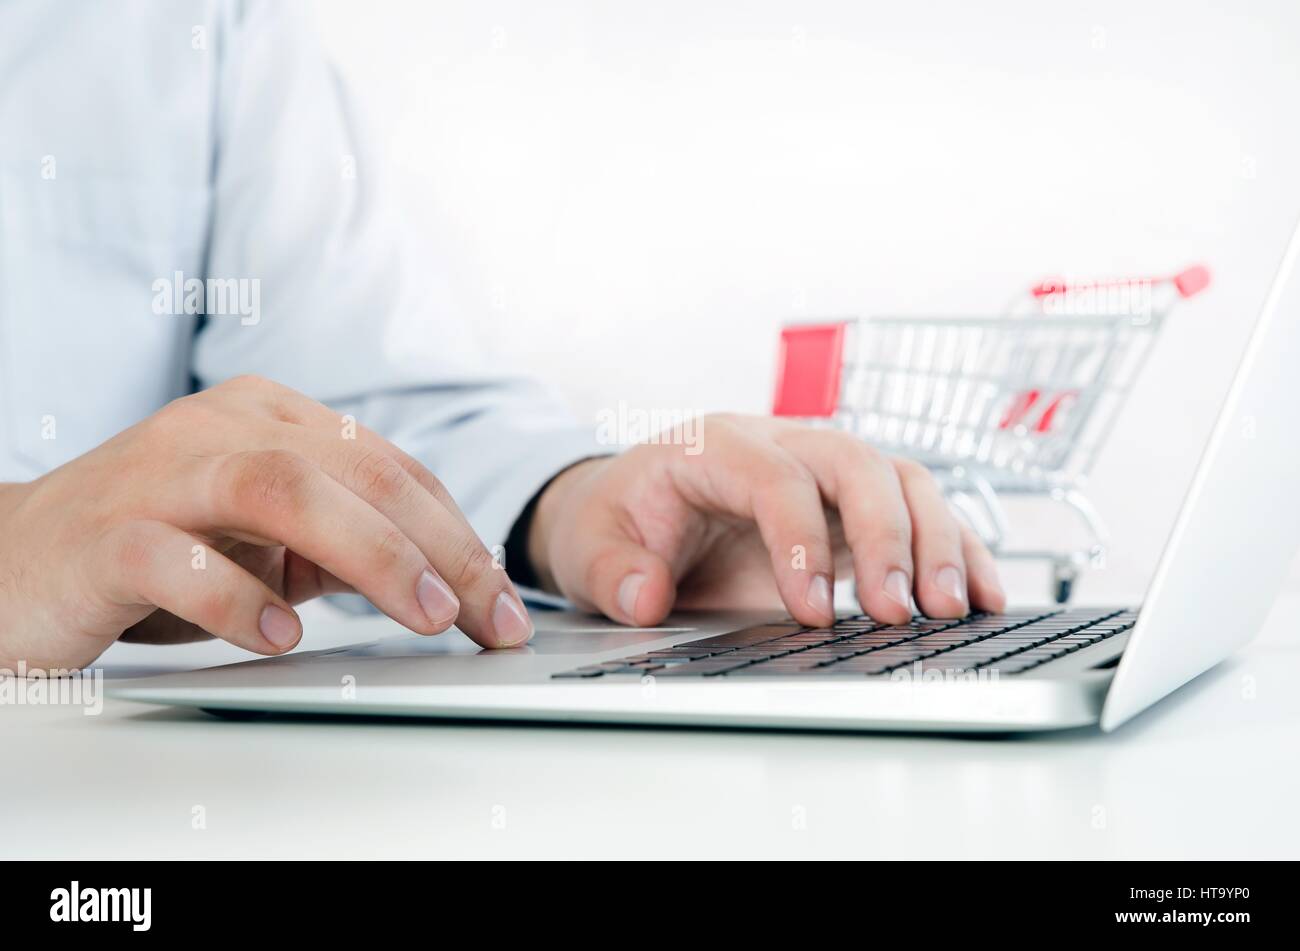 Man using laptop for internet shopping. Bright composition with shopping trolley in background. Stock Photo